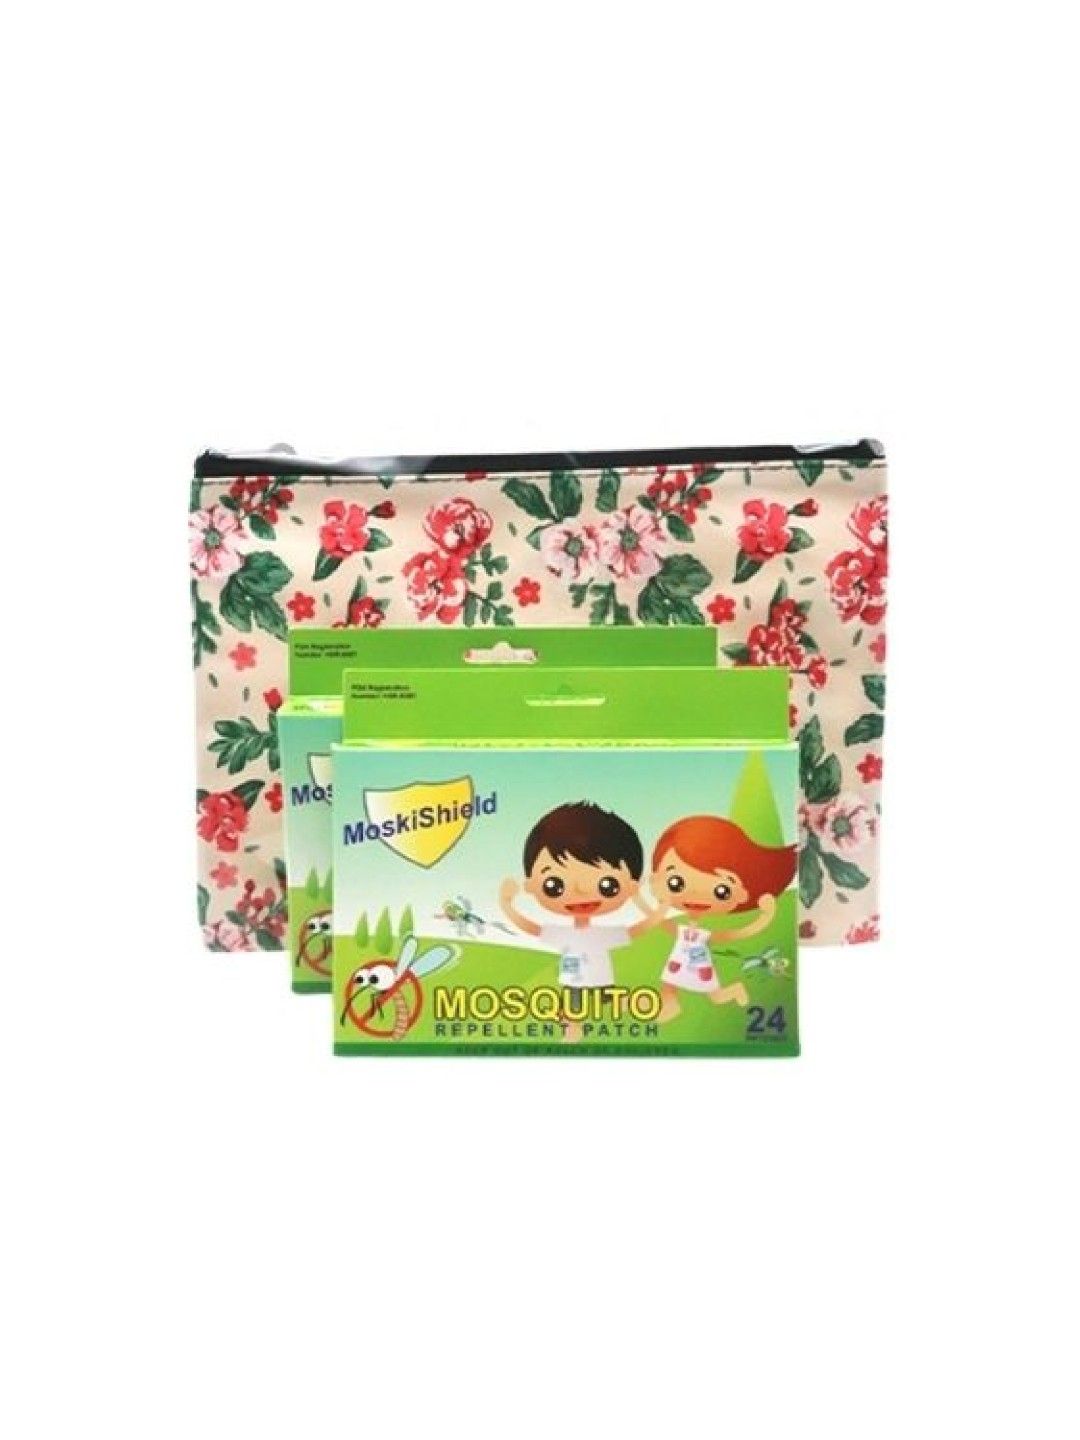 Moskishield Mosquito Repellent Patch (Set of 2) with Free Multipurpose Pouch